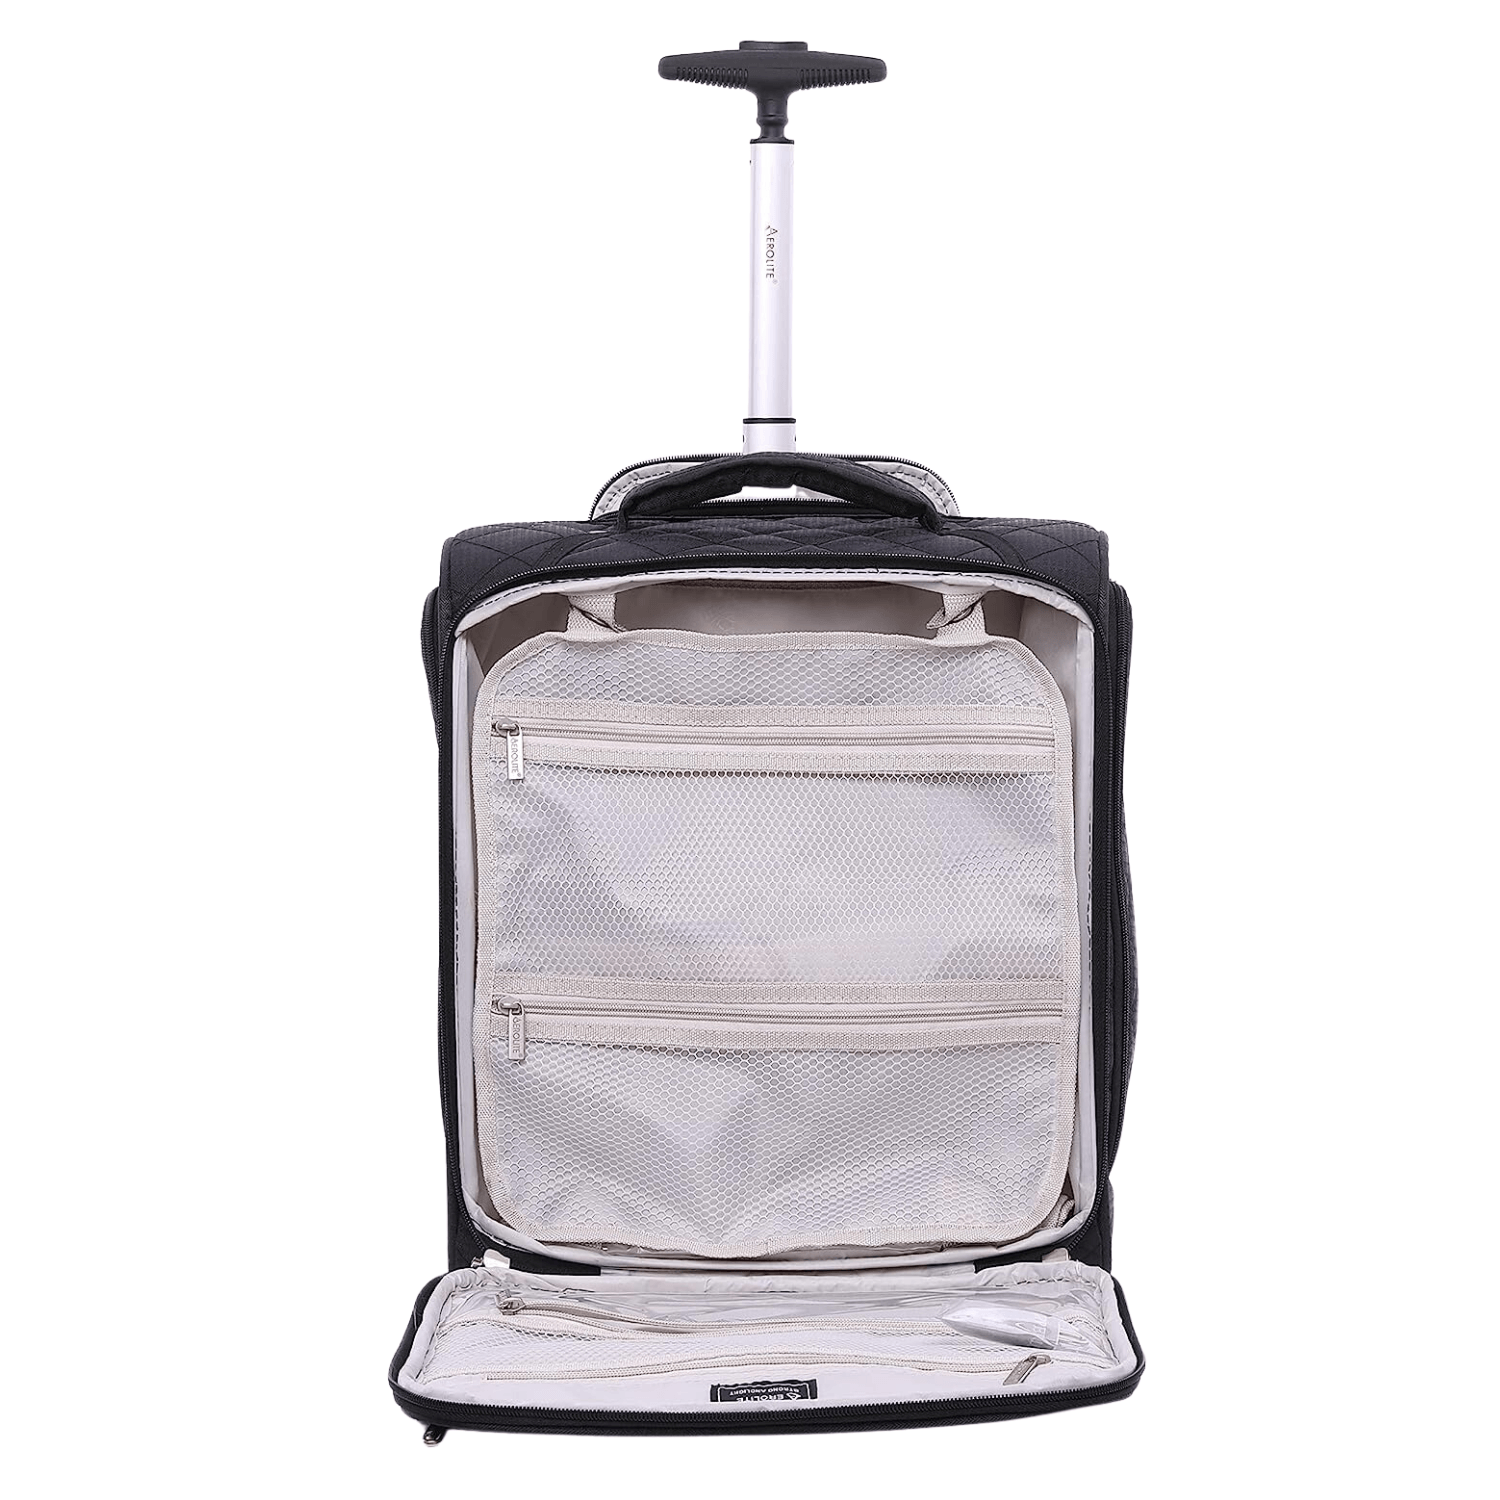 Delwin Polycarbonate fibre Trolley suitcase, Number Of Wheel: 8 Wheel,  Size: 20